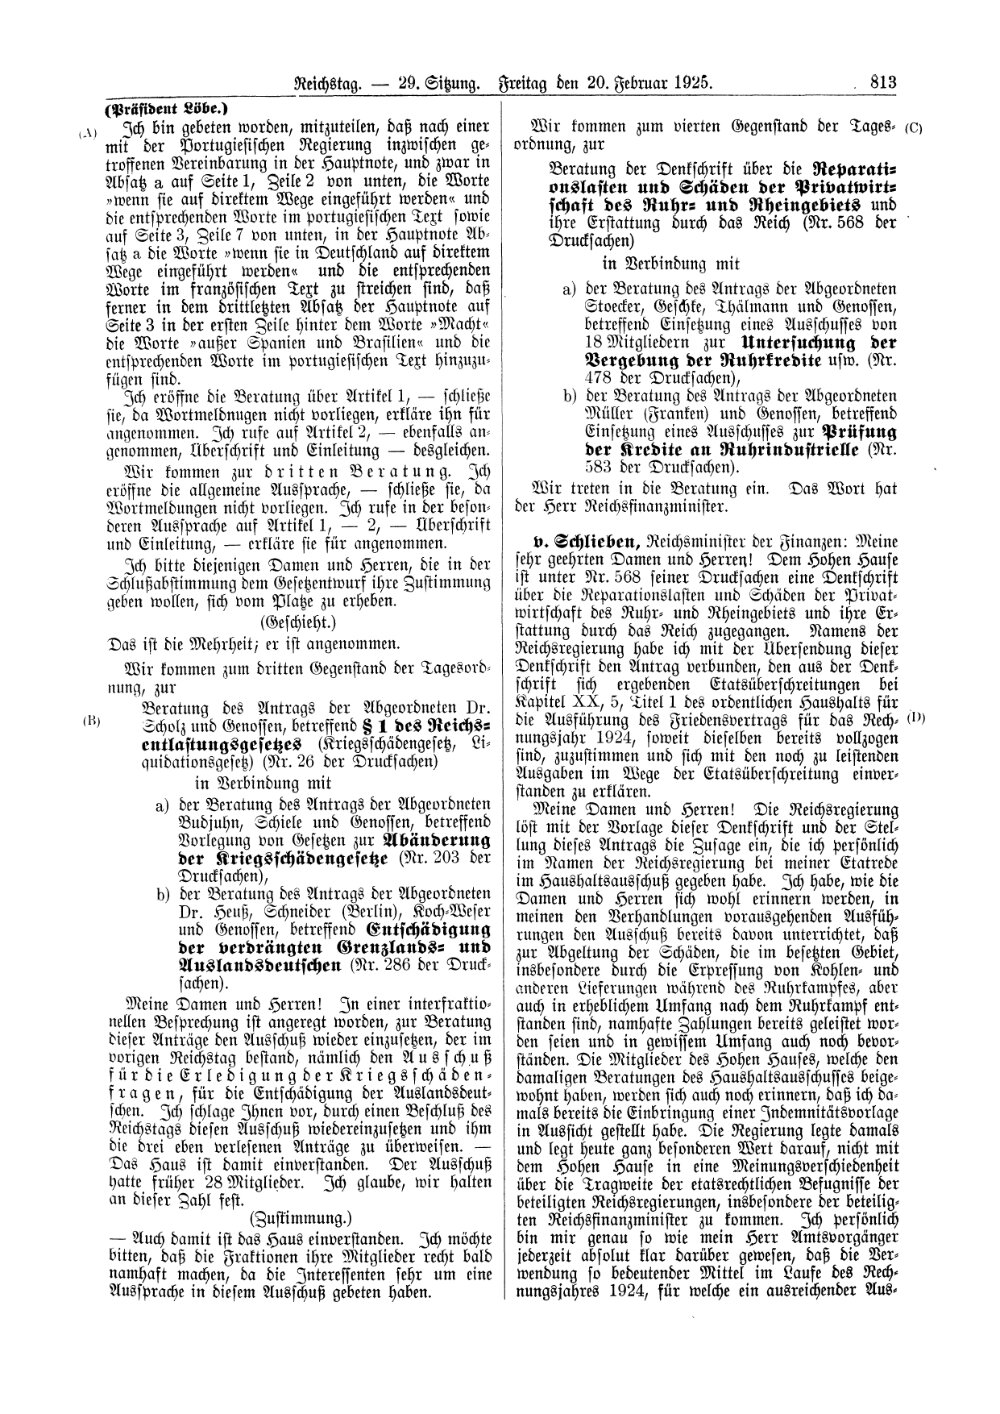 Scan of page 813